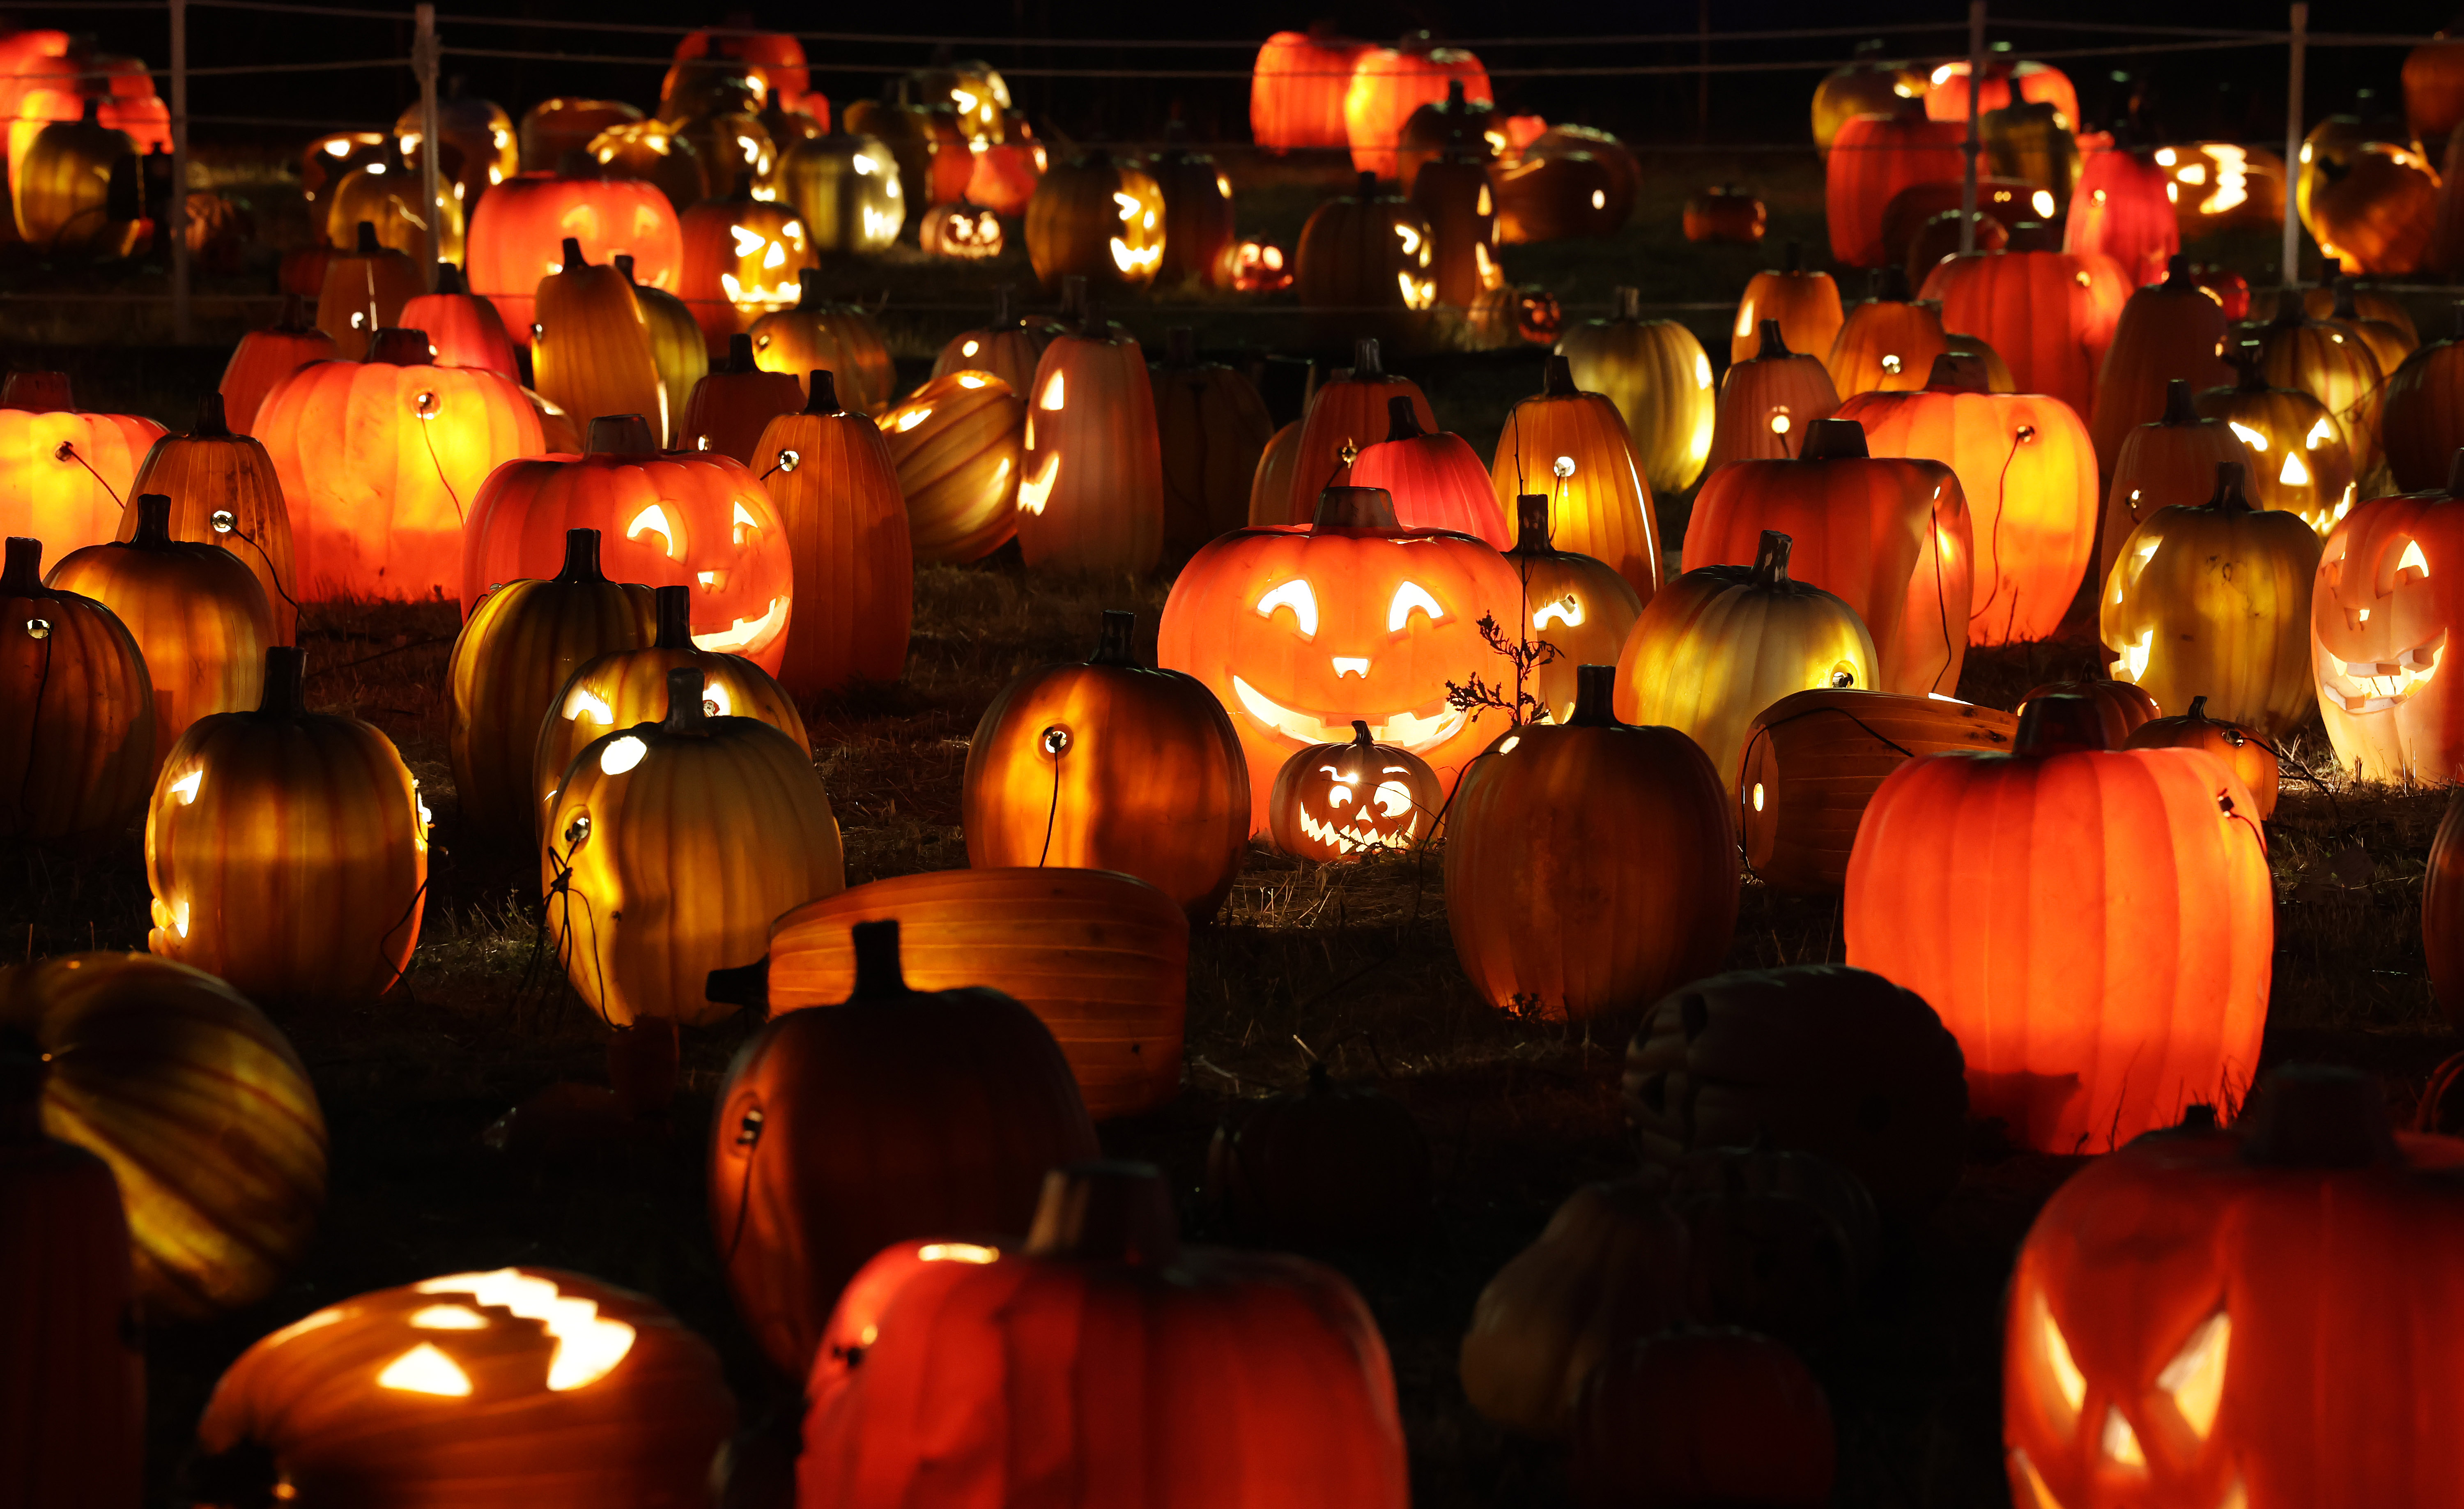 The Spooky at illumi Thematic universe will stun everybody with more than 1,500 jack-o-lanterns of all shapes &amp; sizes!